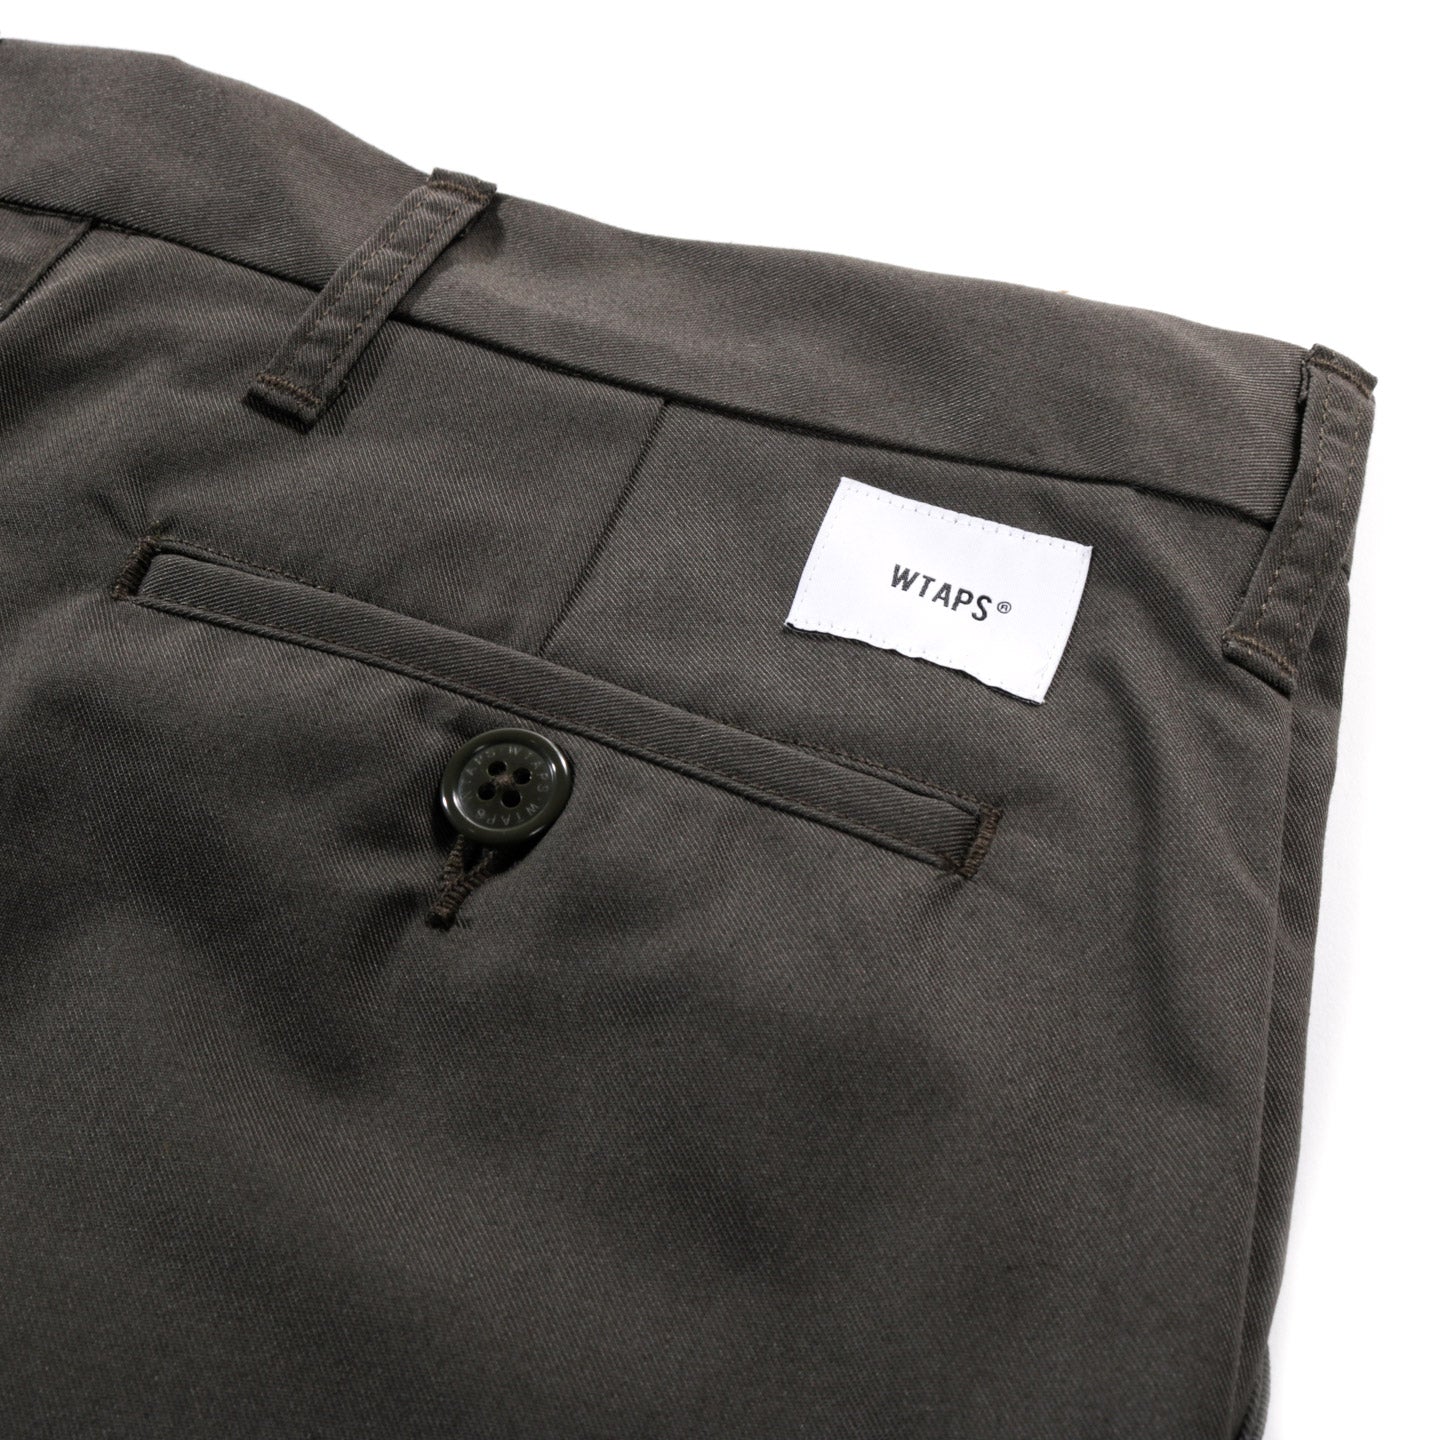 WTAPS CREASE TROUSERS OLIVE DRAB POLY COTTON TWILL | TODAY CLOTHING